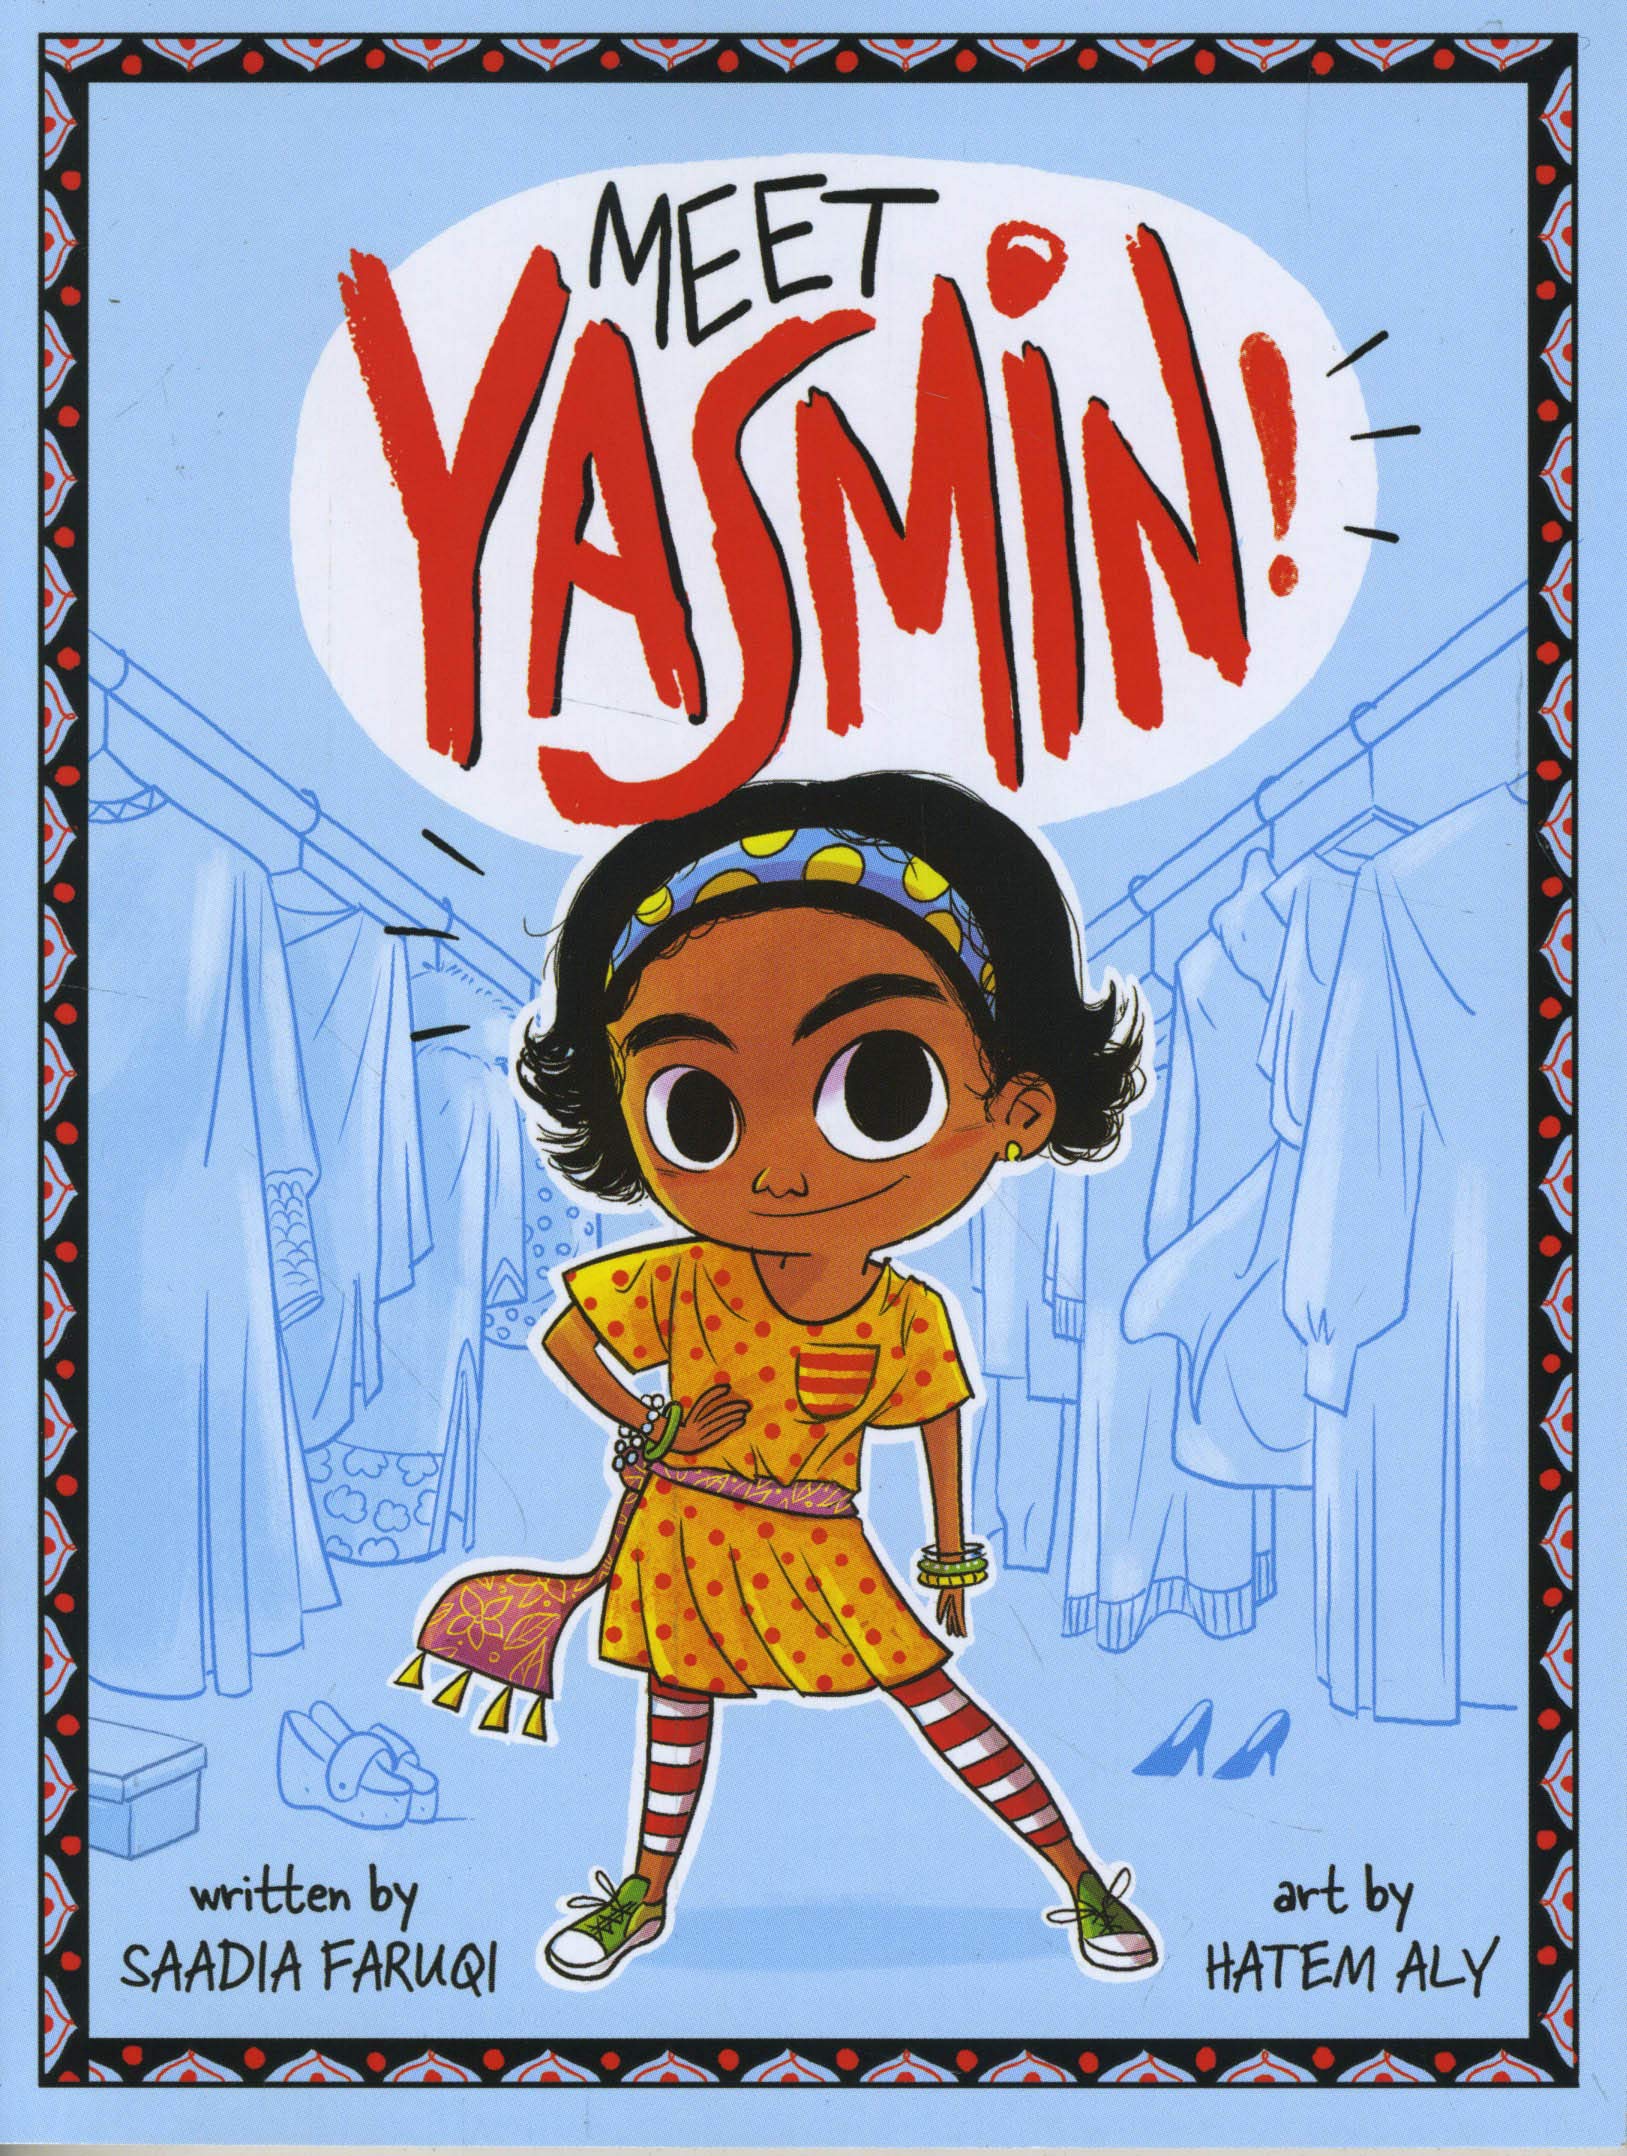 Image of the cover of the book, Meet Yasmin!